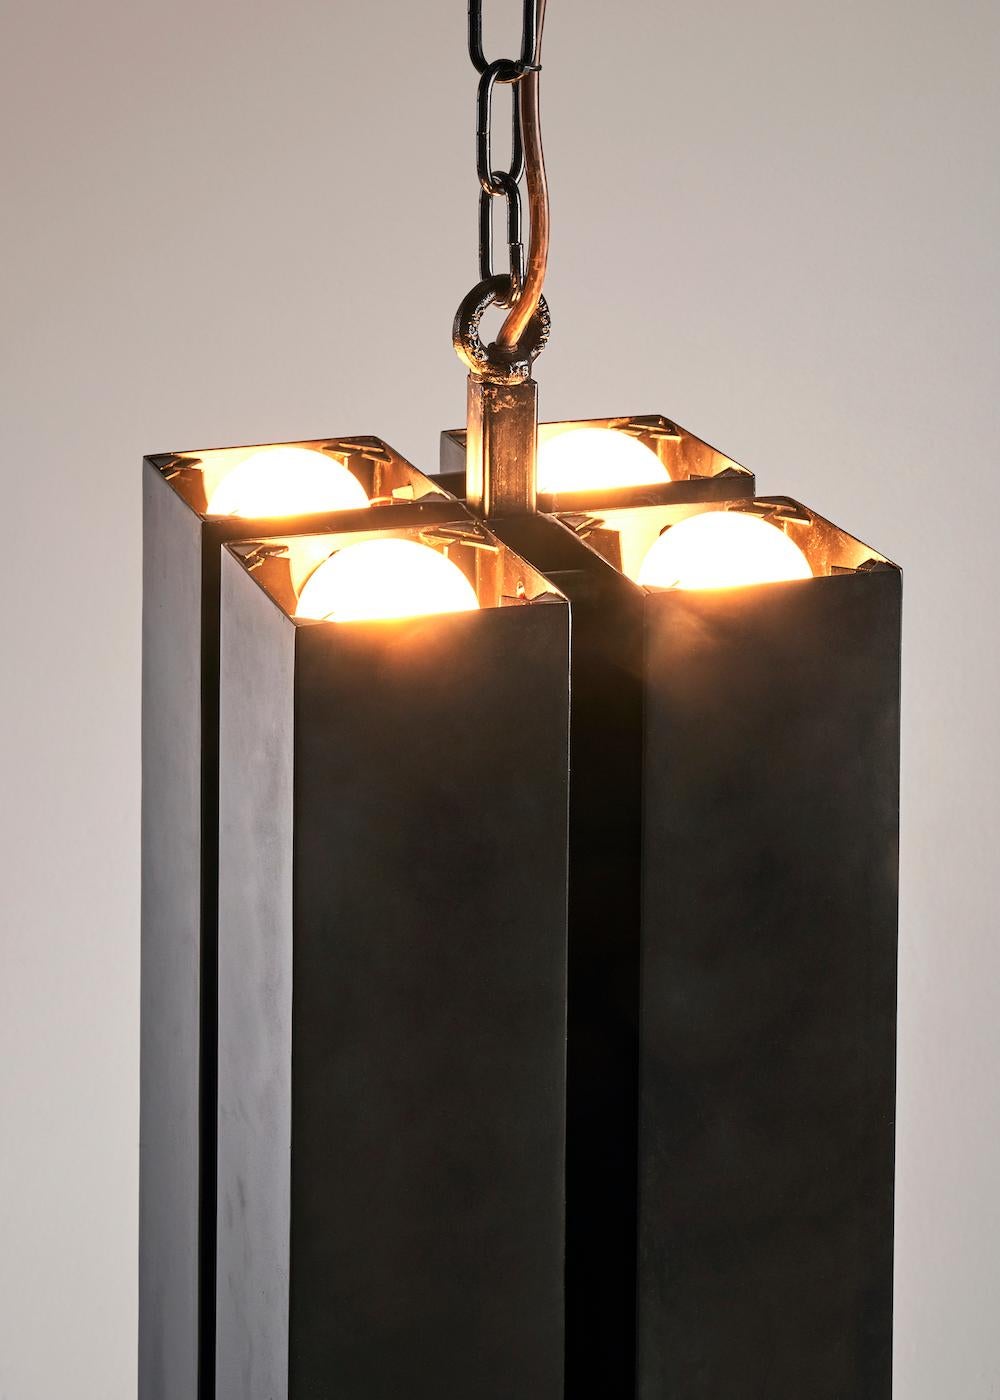 This is a custom pendant with a blackened brass body. LED light bulbs within the fixture create an uplight and a downlight effect. Choices of material are patina'ed brass or stainless steel bodies. Each fixture is designed and made to each client's